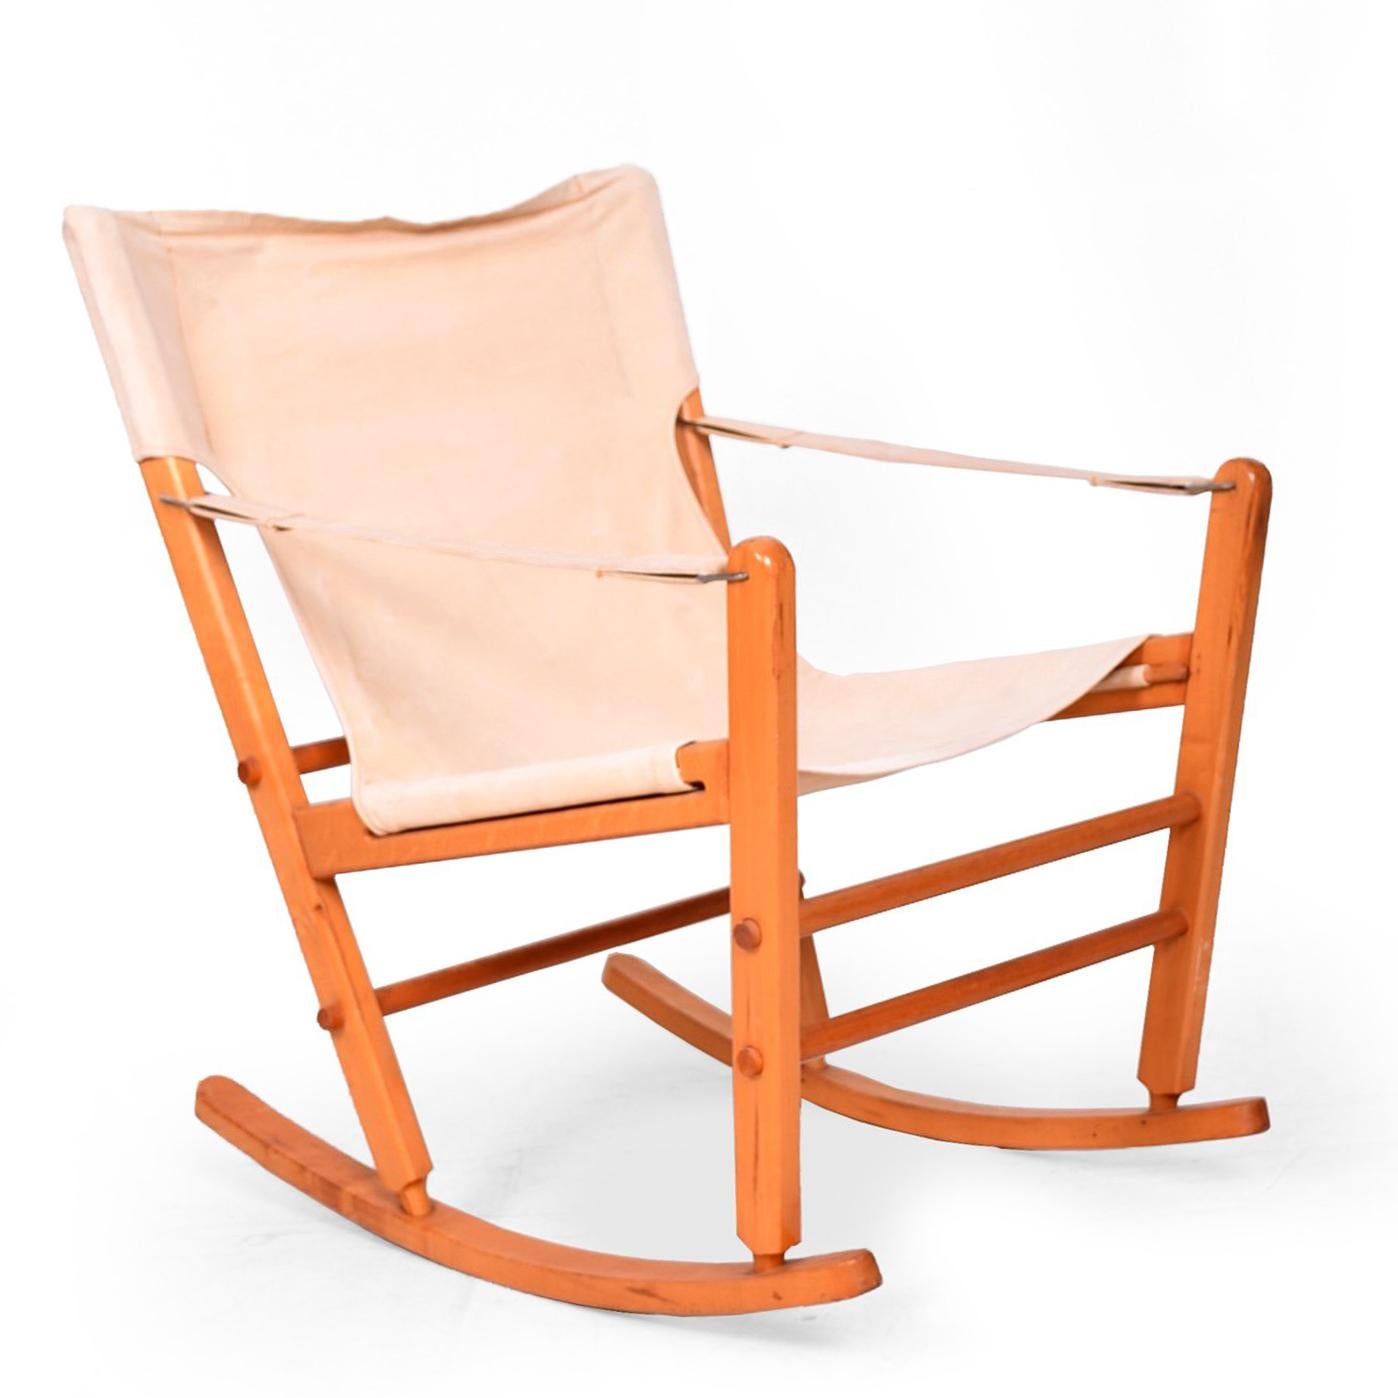 Description:
For your consideration a Mid-Century Modern rocker with a safari chair style construction. Canvas with solid maple wood frame.
Original label from the maker present: 